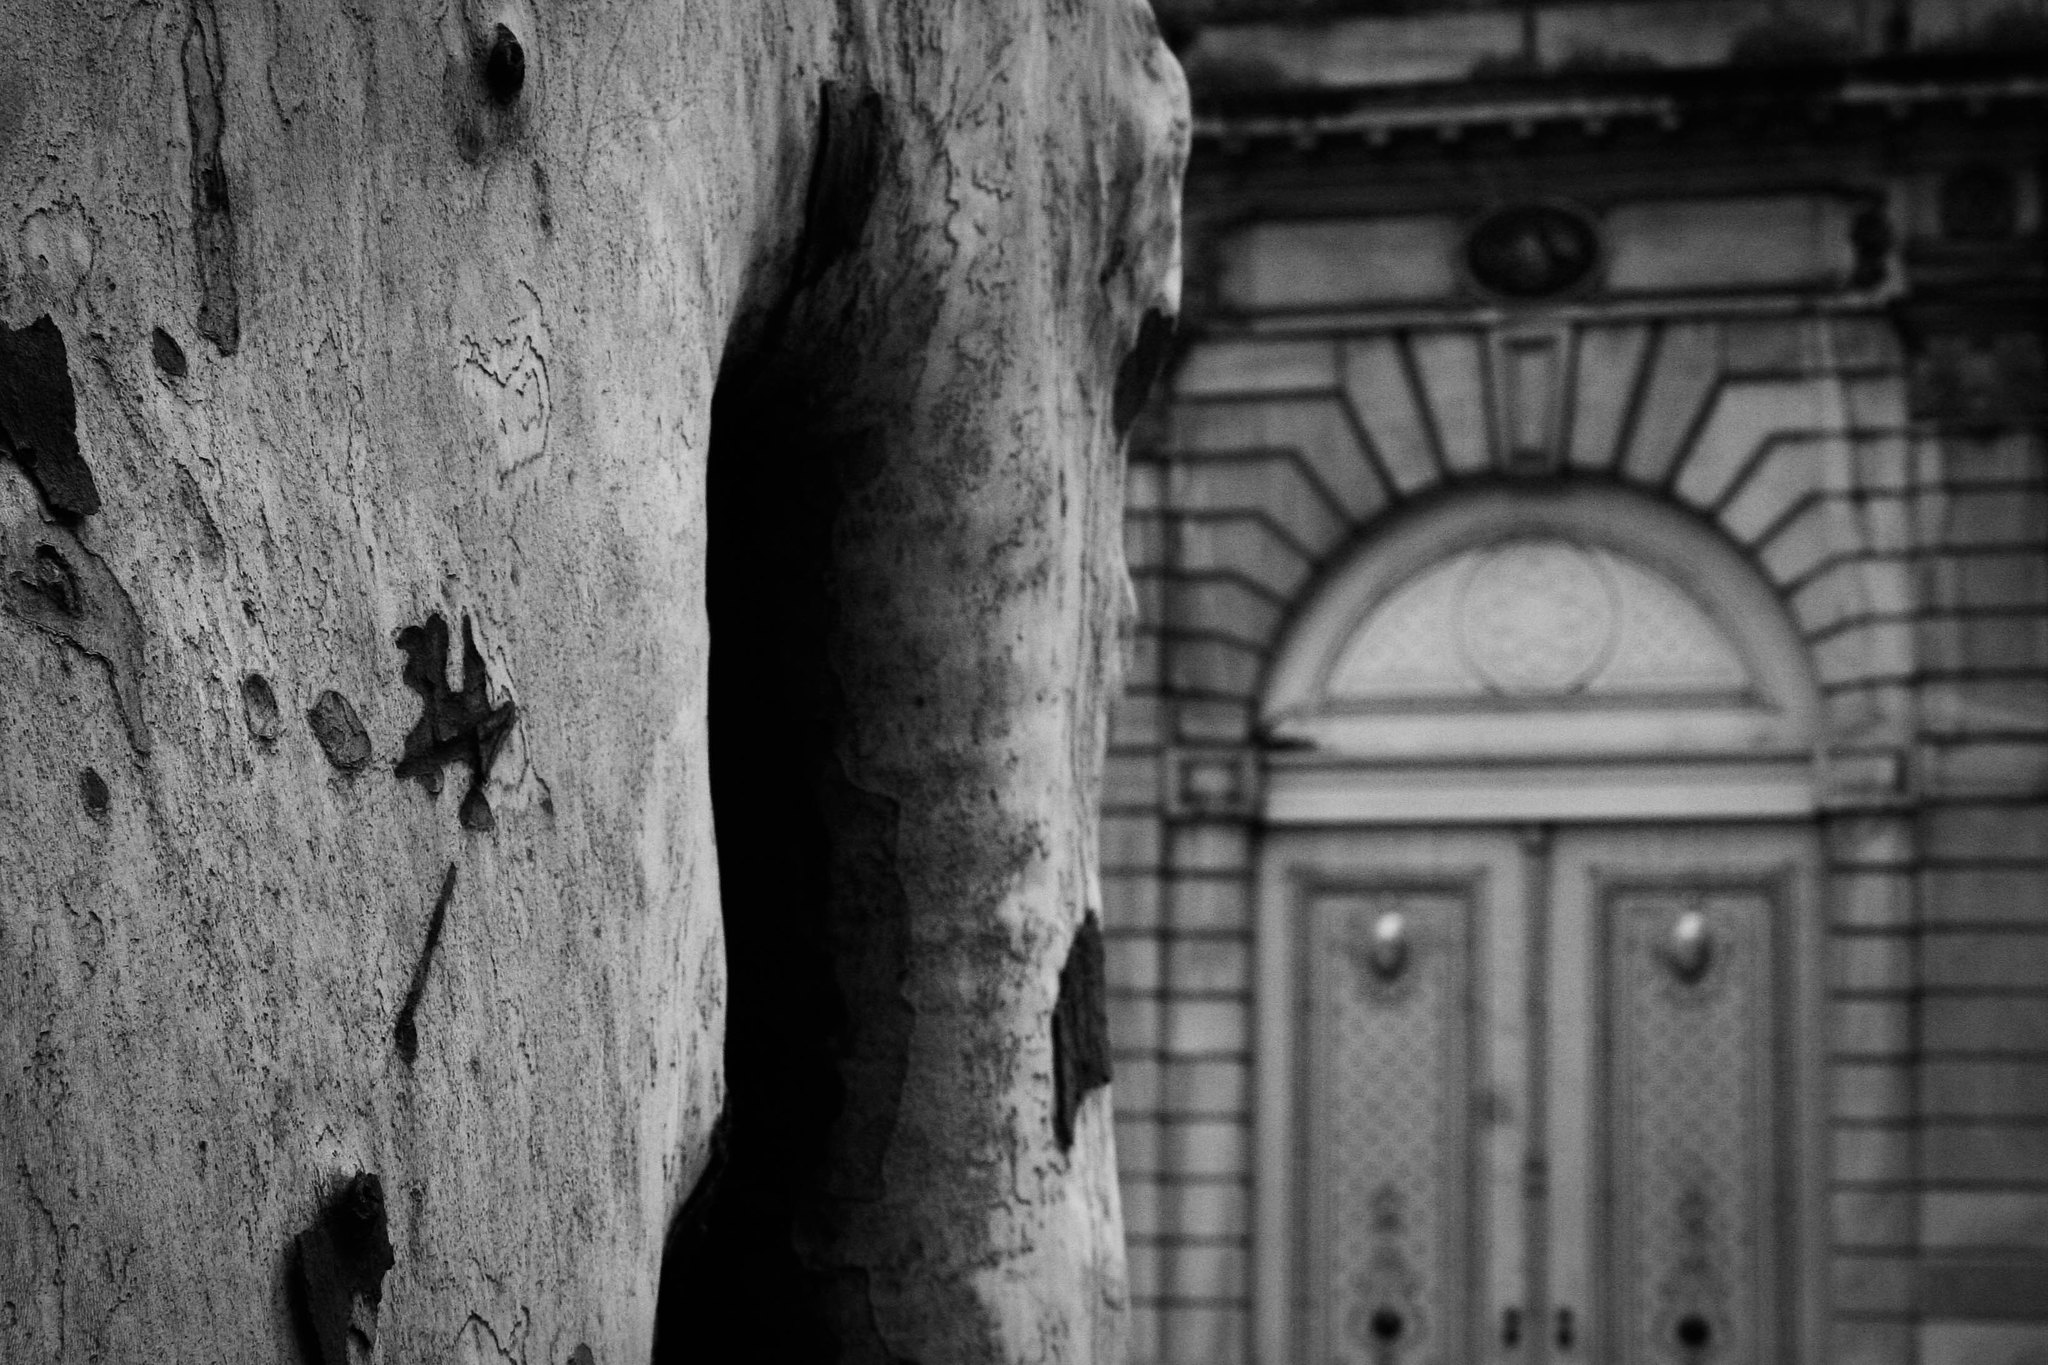 A plane tree and a doorway.